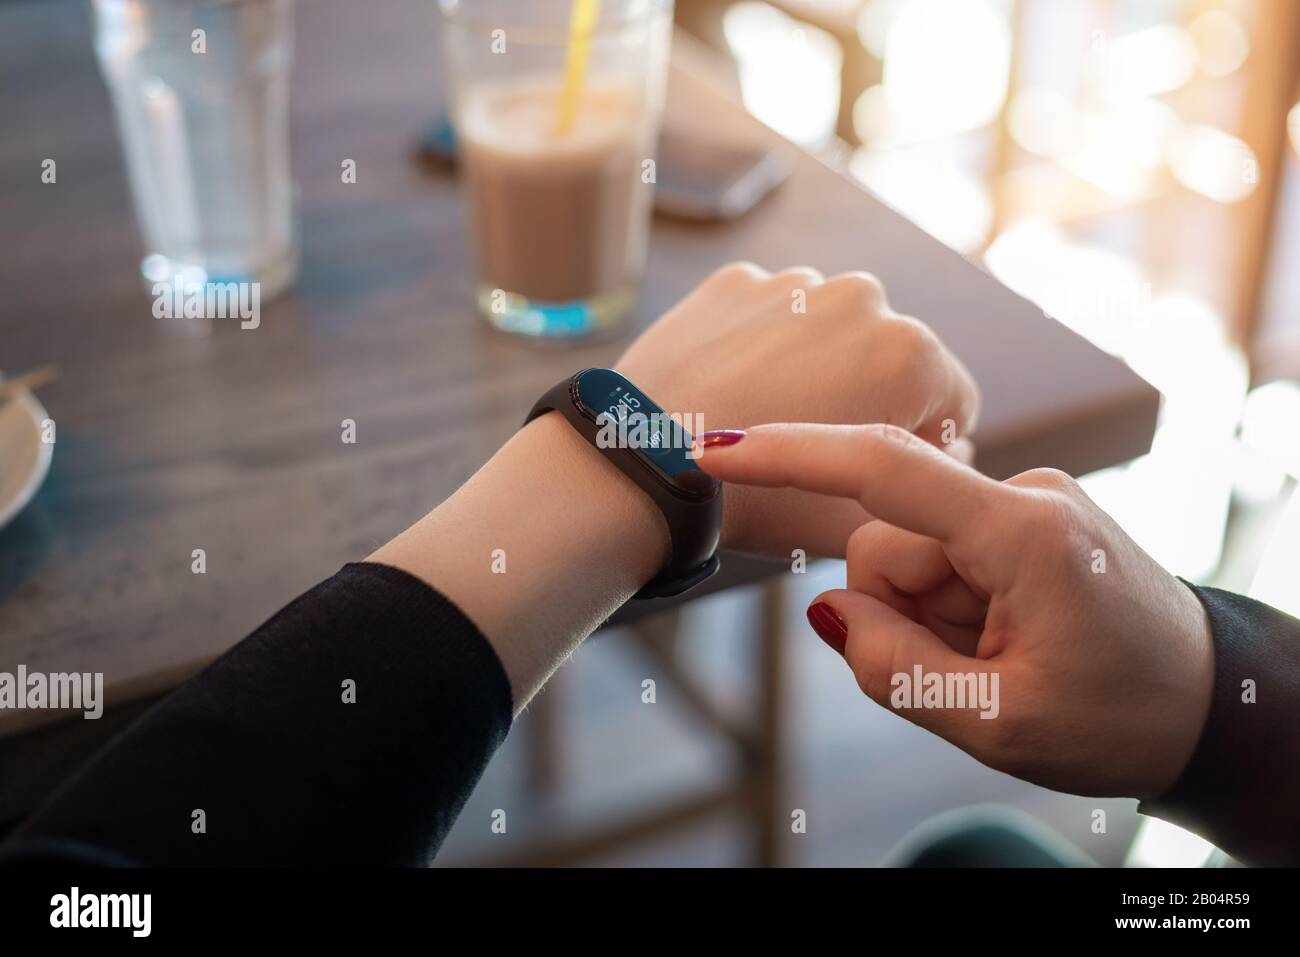 Girl uses apss on her smart band to view health parameters Stock Photo